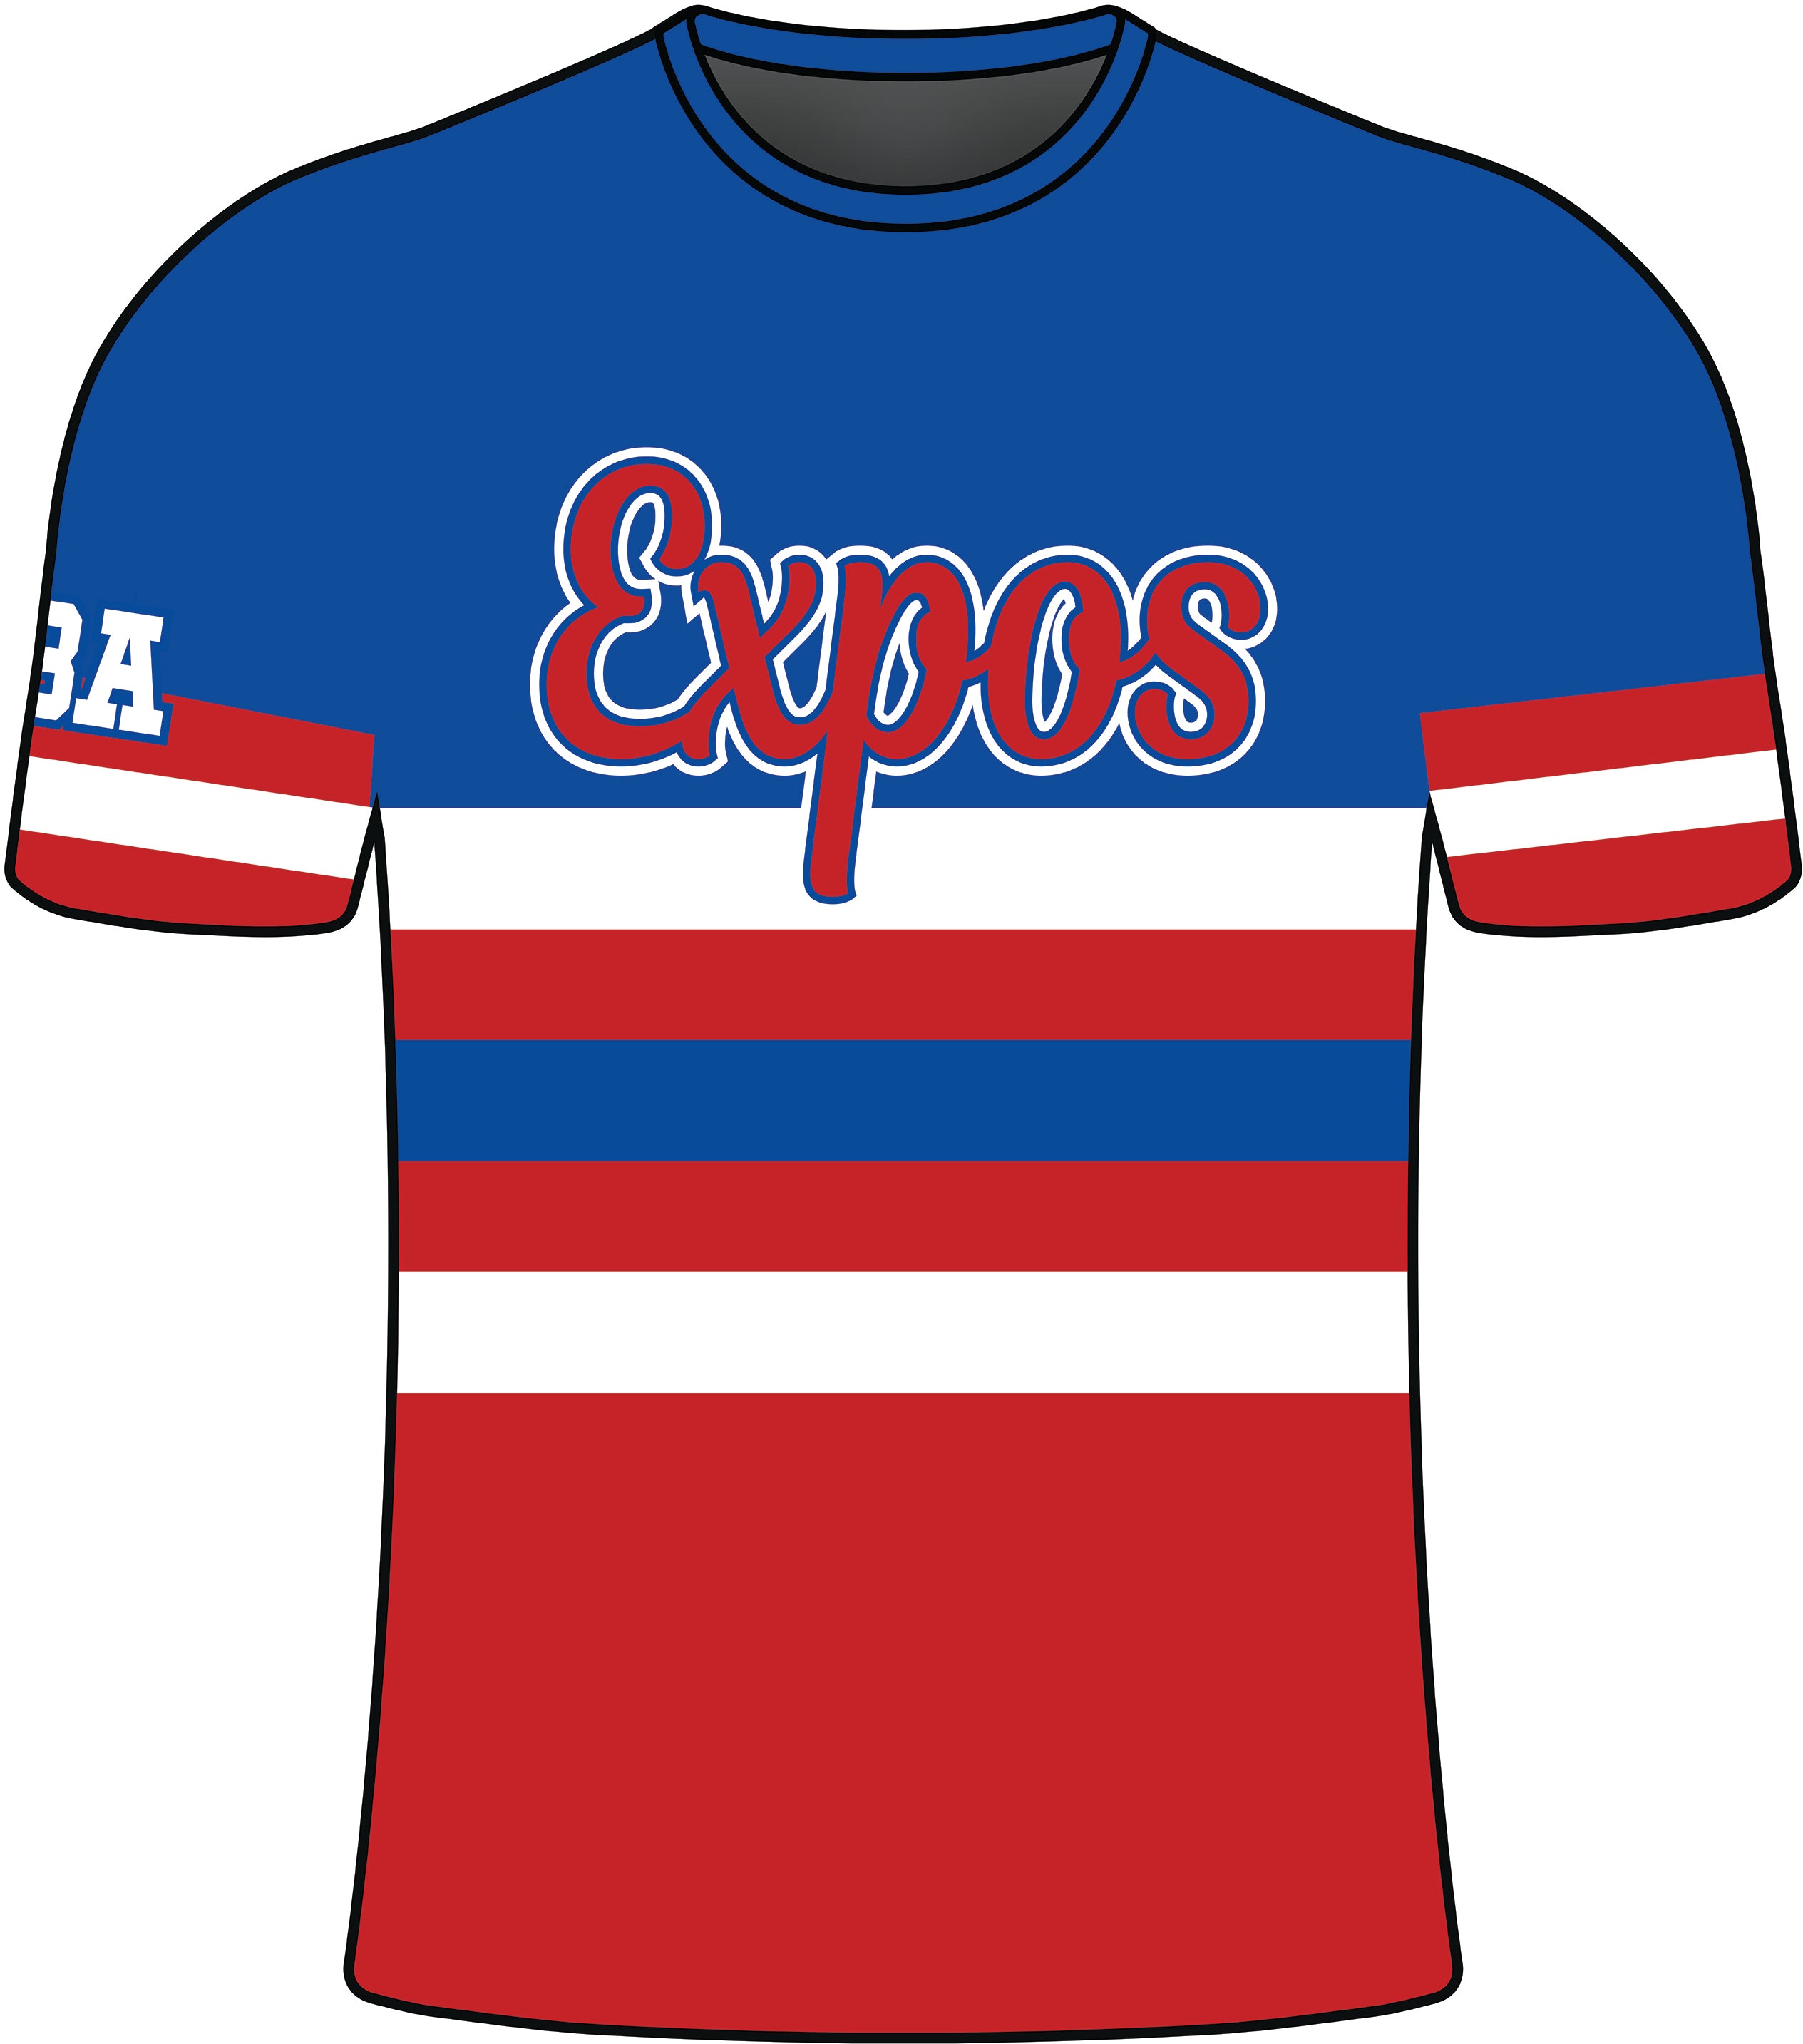 Full Dye Sublimated Short Sleeve Jersey RED STRIPE EXPOS